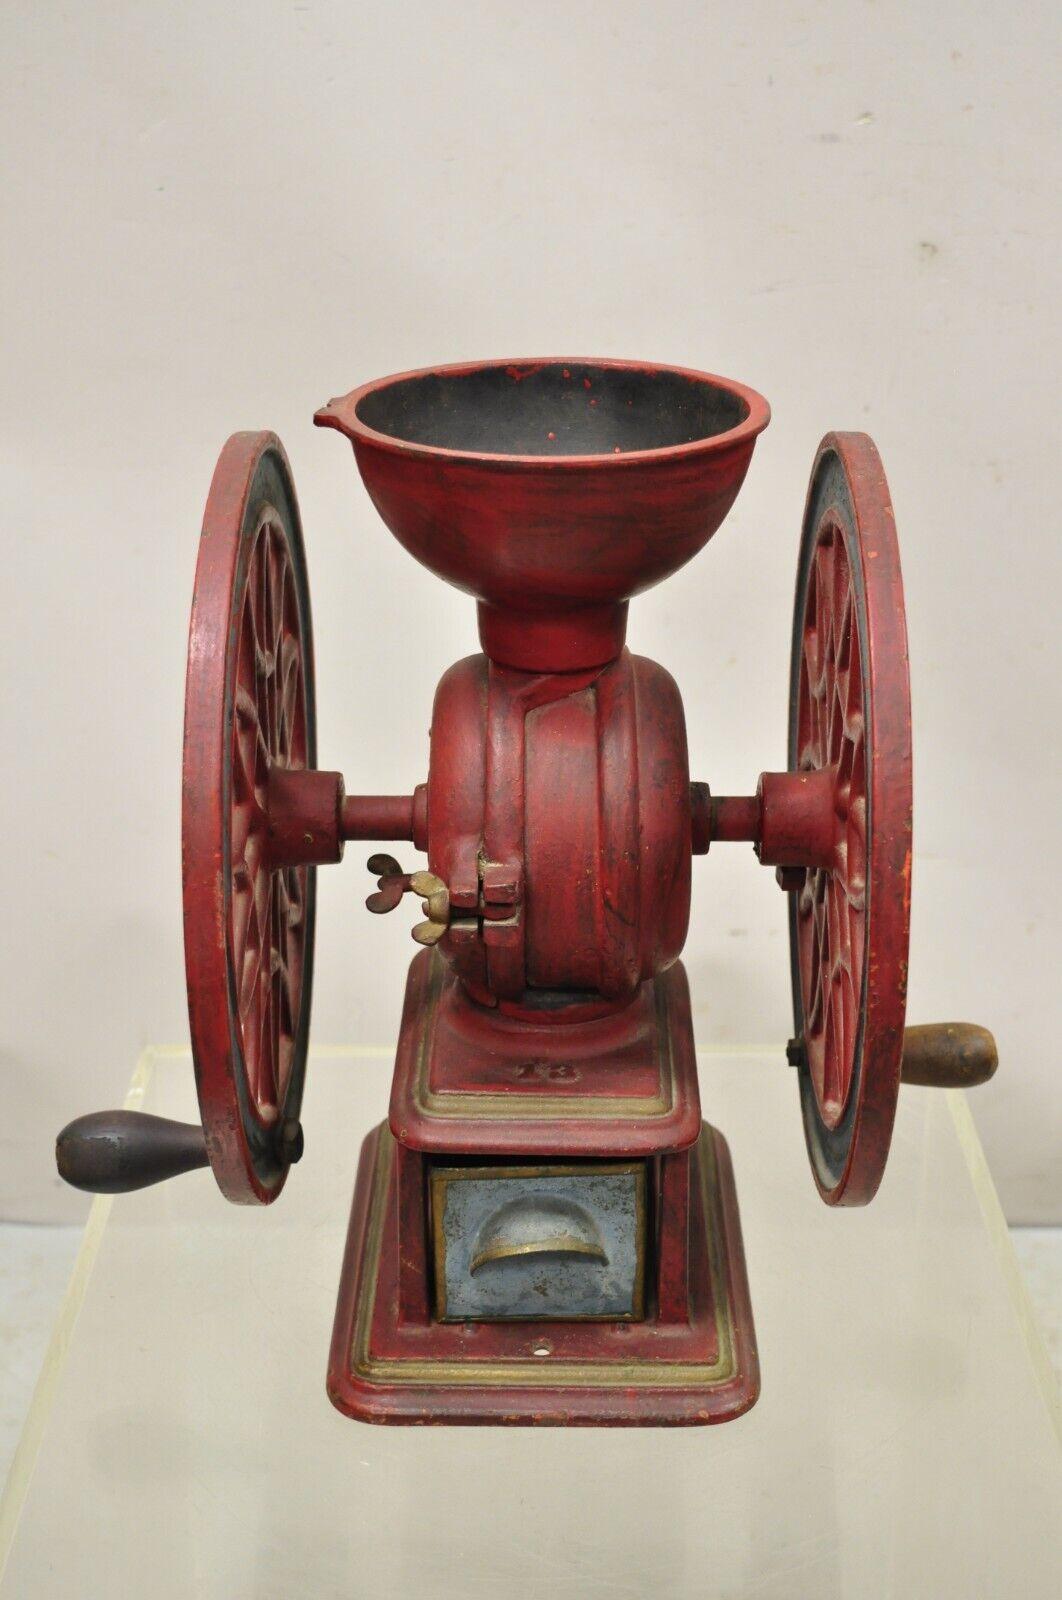 Swift Mill Lane Red & Blue Cast Iron Victorian Coffee Mill Grinder w/ Drawer. Circa Late 19th Century. Measurements: 14.5